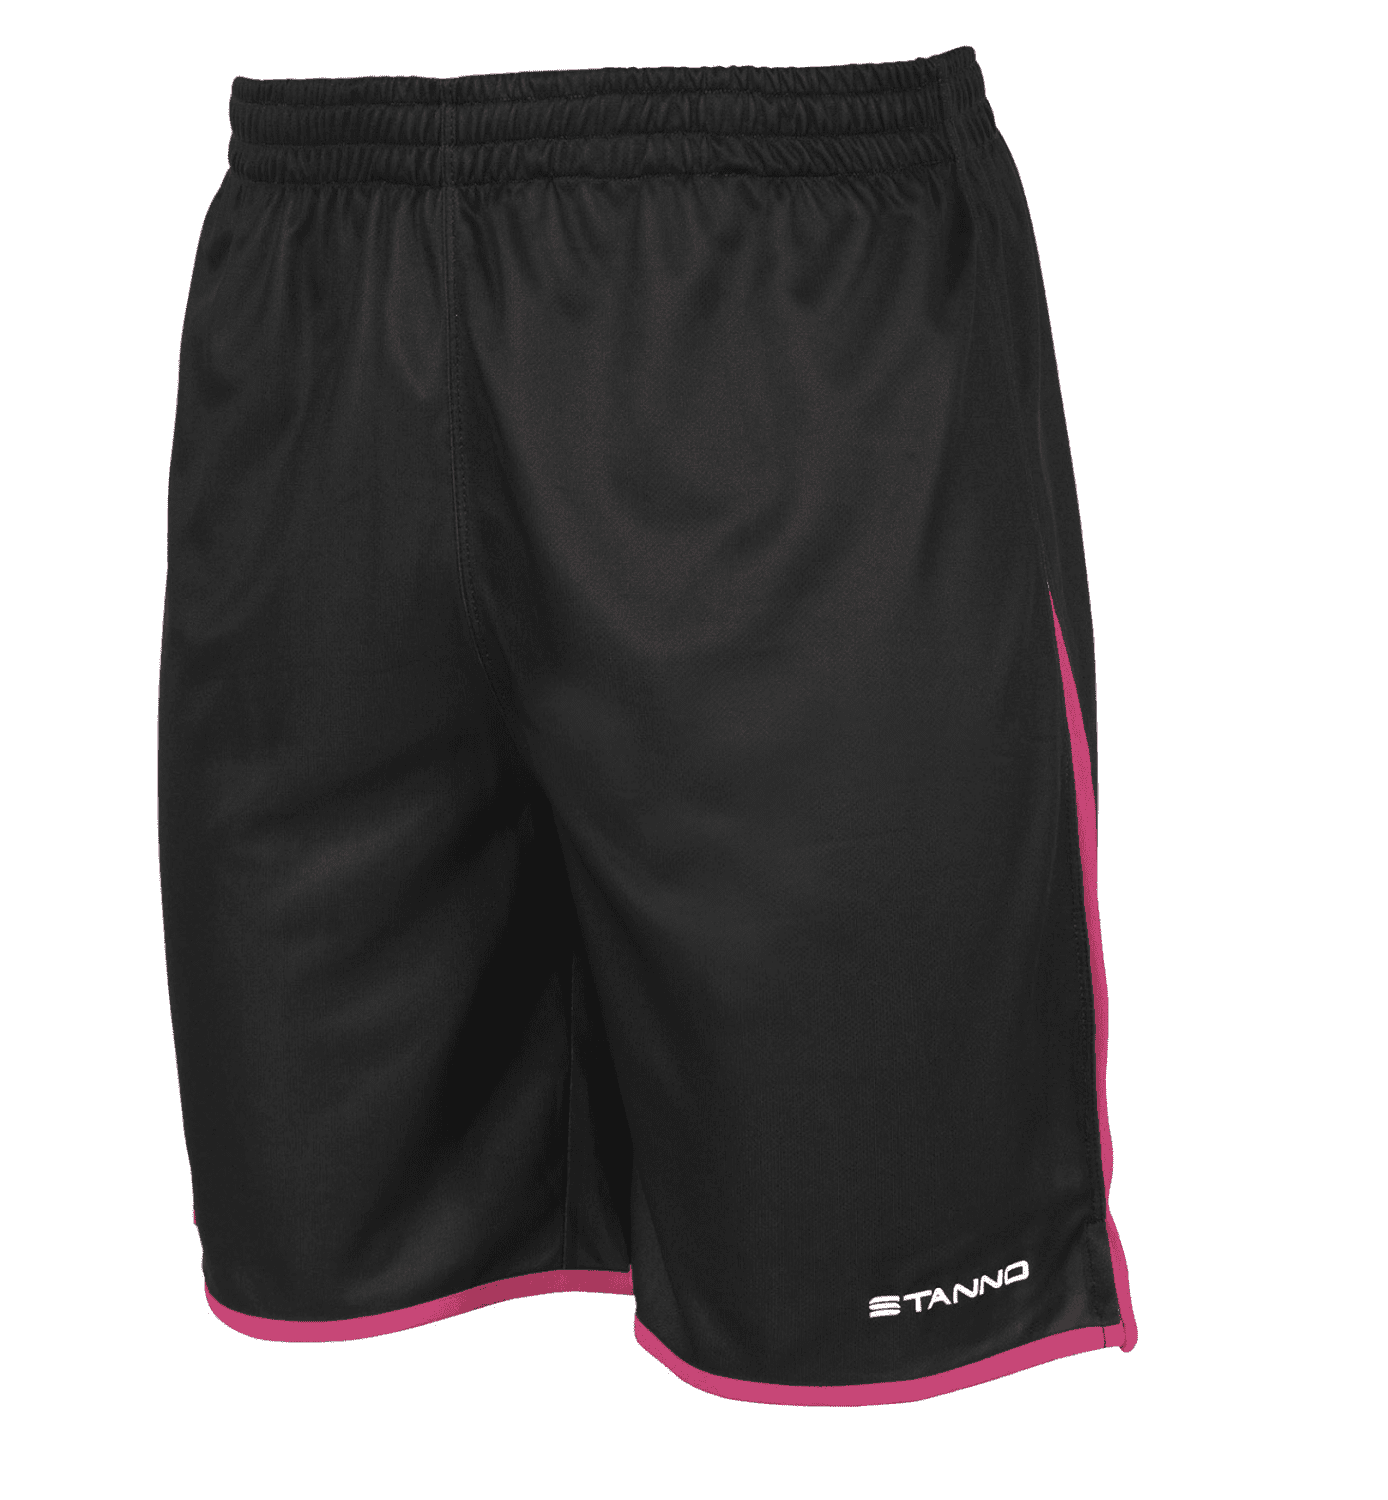 Stanno Altius Shorts - Black / Pink - Total Football Direct